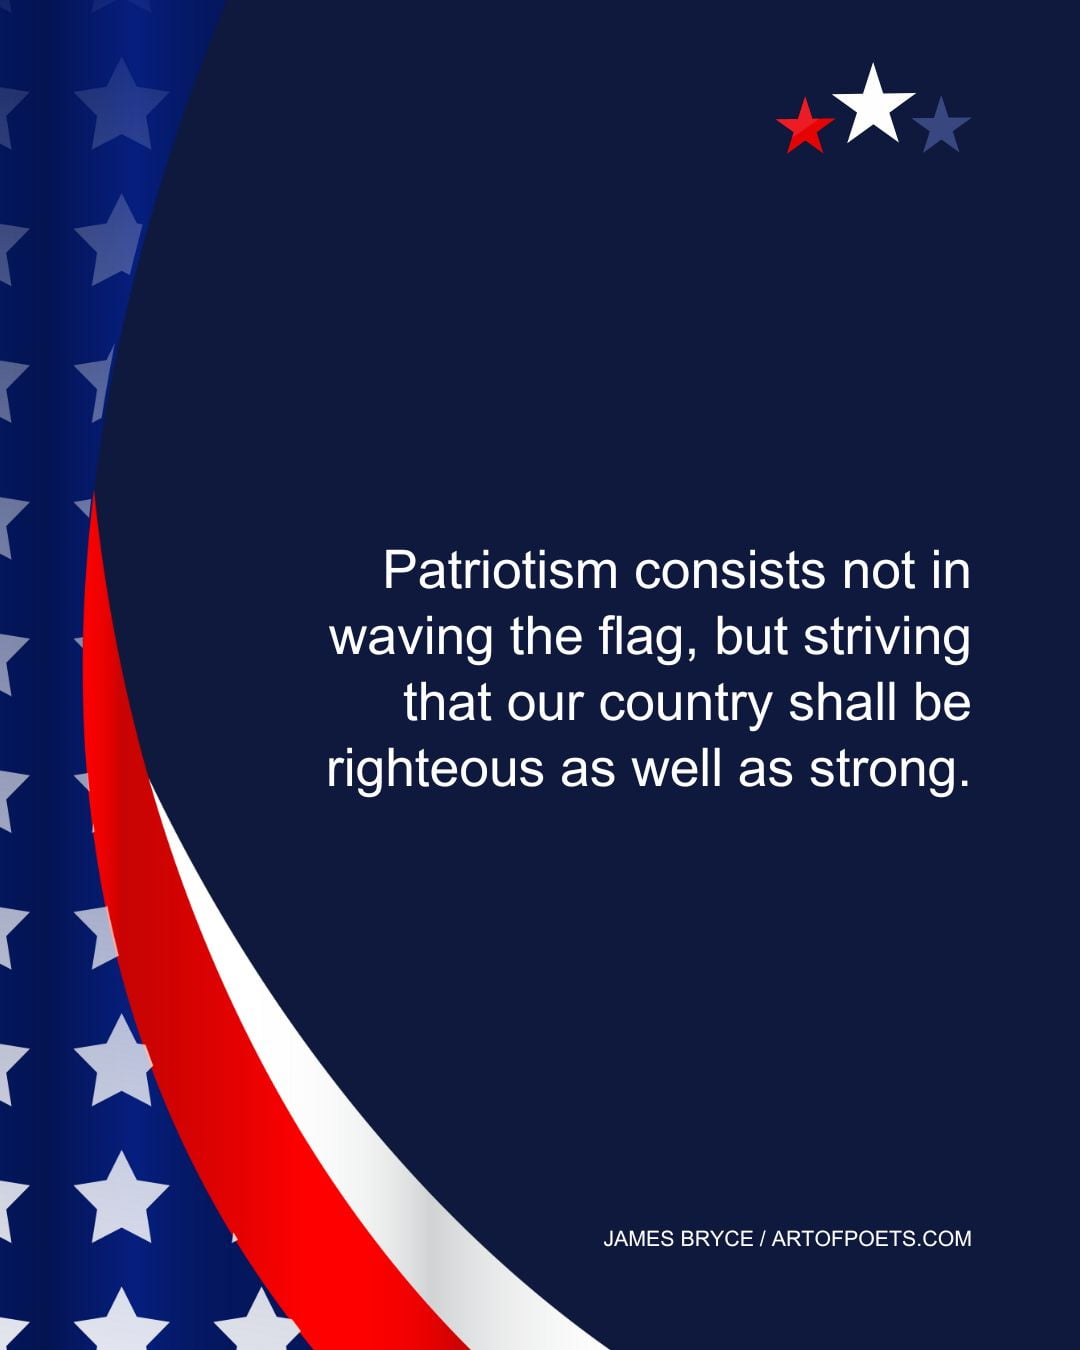 Patriotism consists not in waving the flag but striving that our country shall be righteous as well as strong